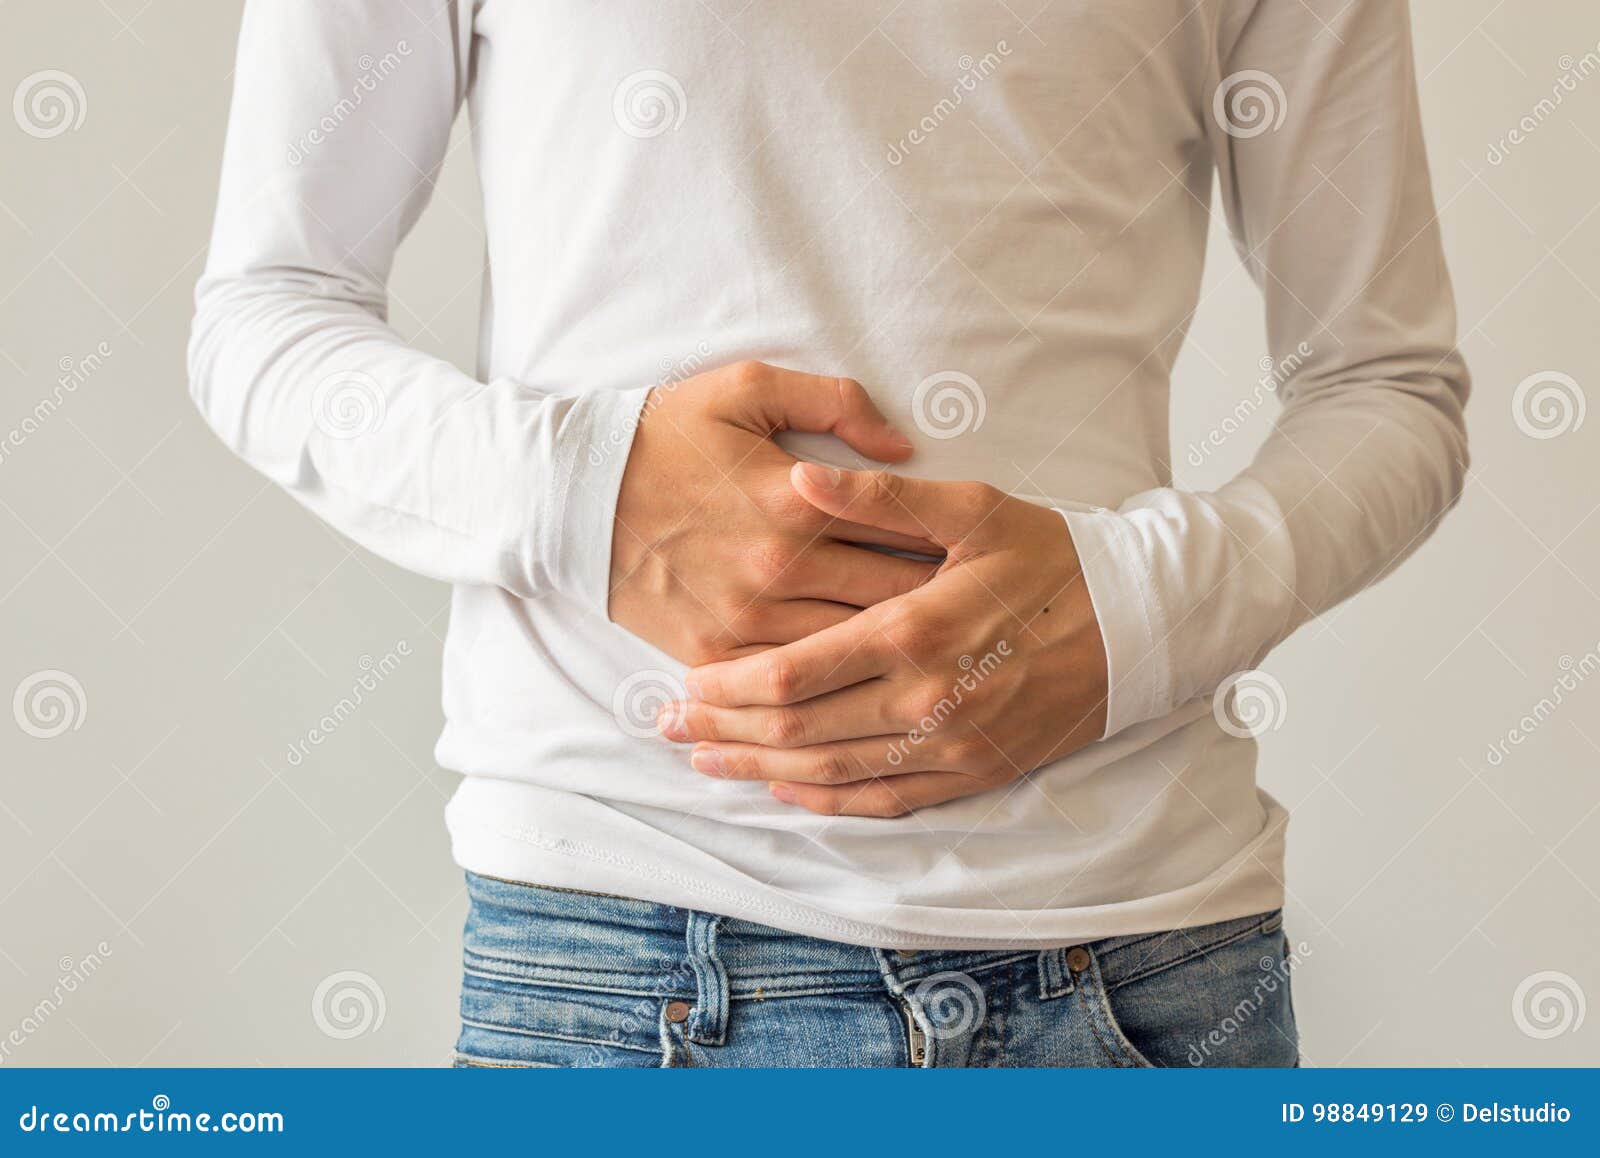 young man suffering from stomach ache diarrhea, constipation, acid reflux, indigestion, nausea